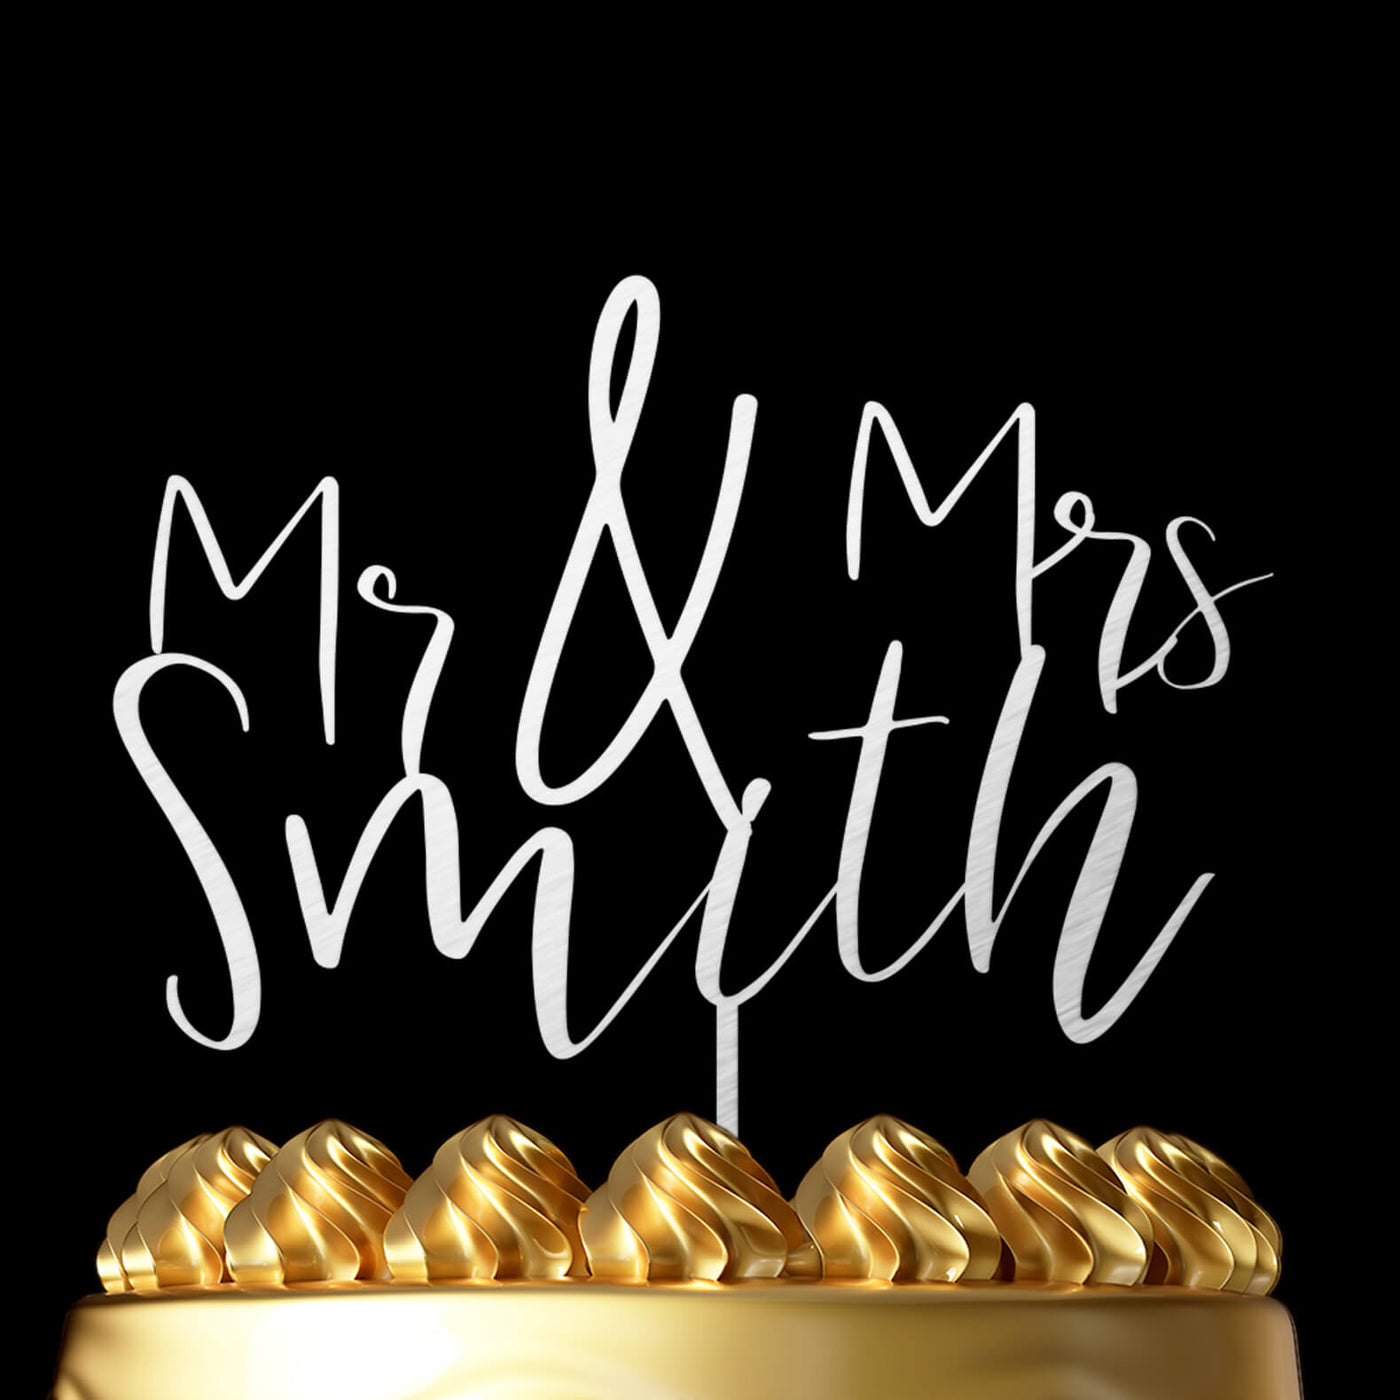 Personalized Cake Topper Lee - Wedding Cake Topper by Luxtomi